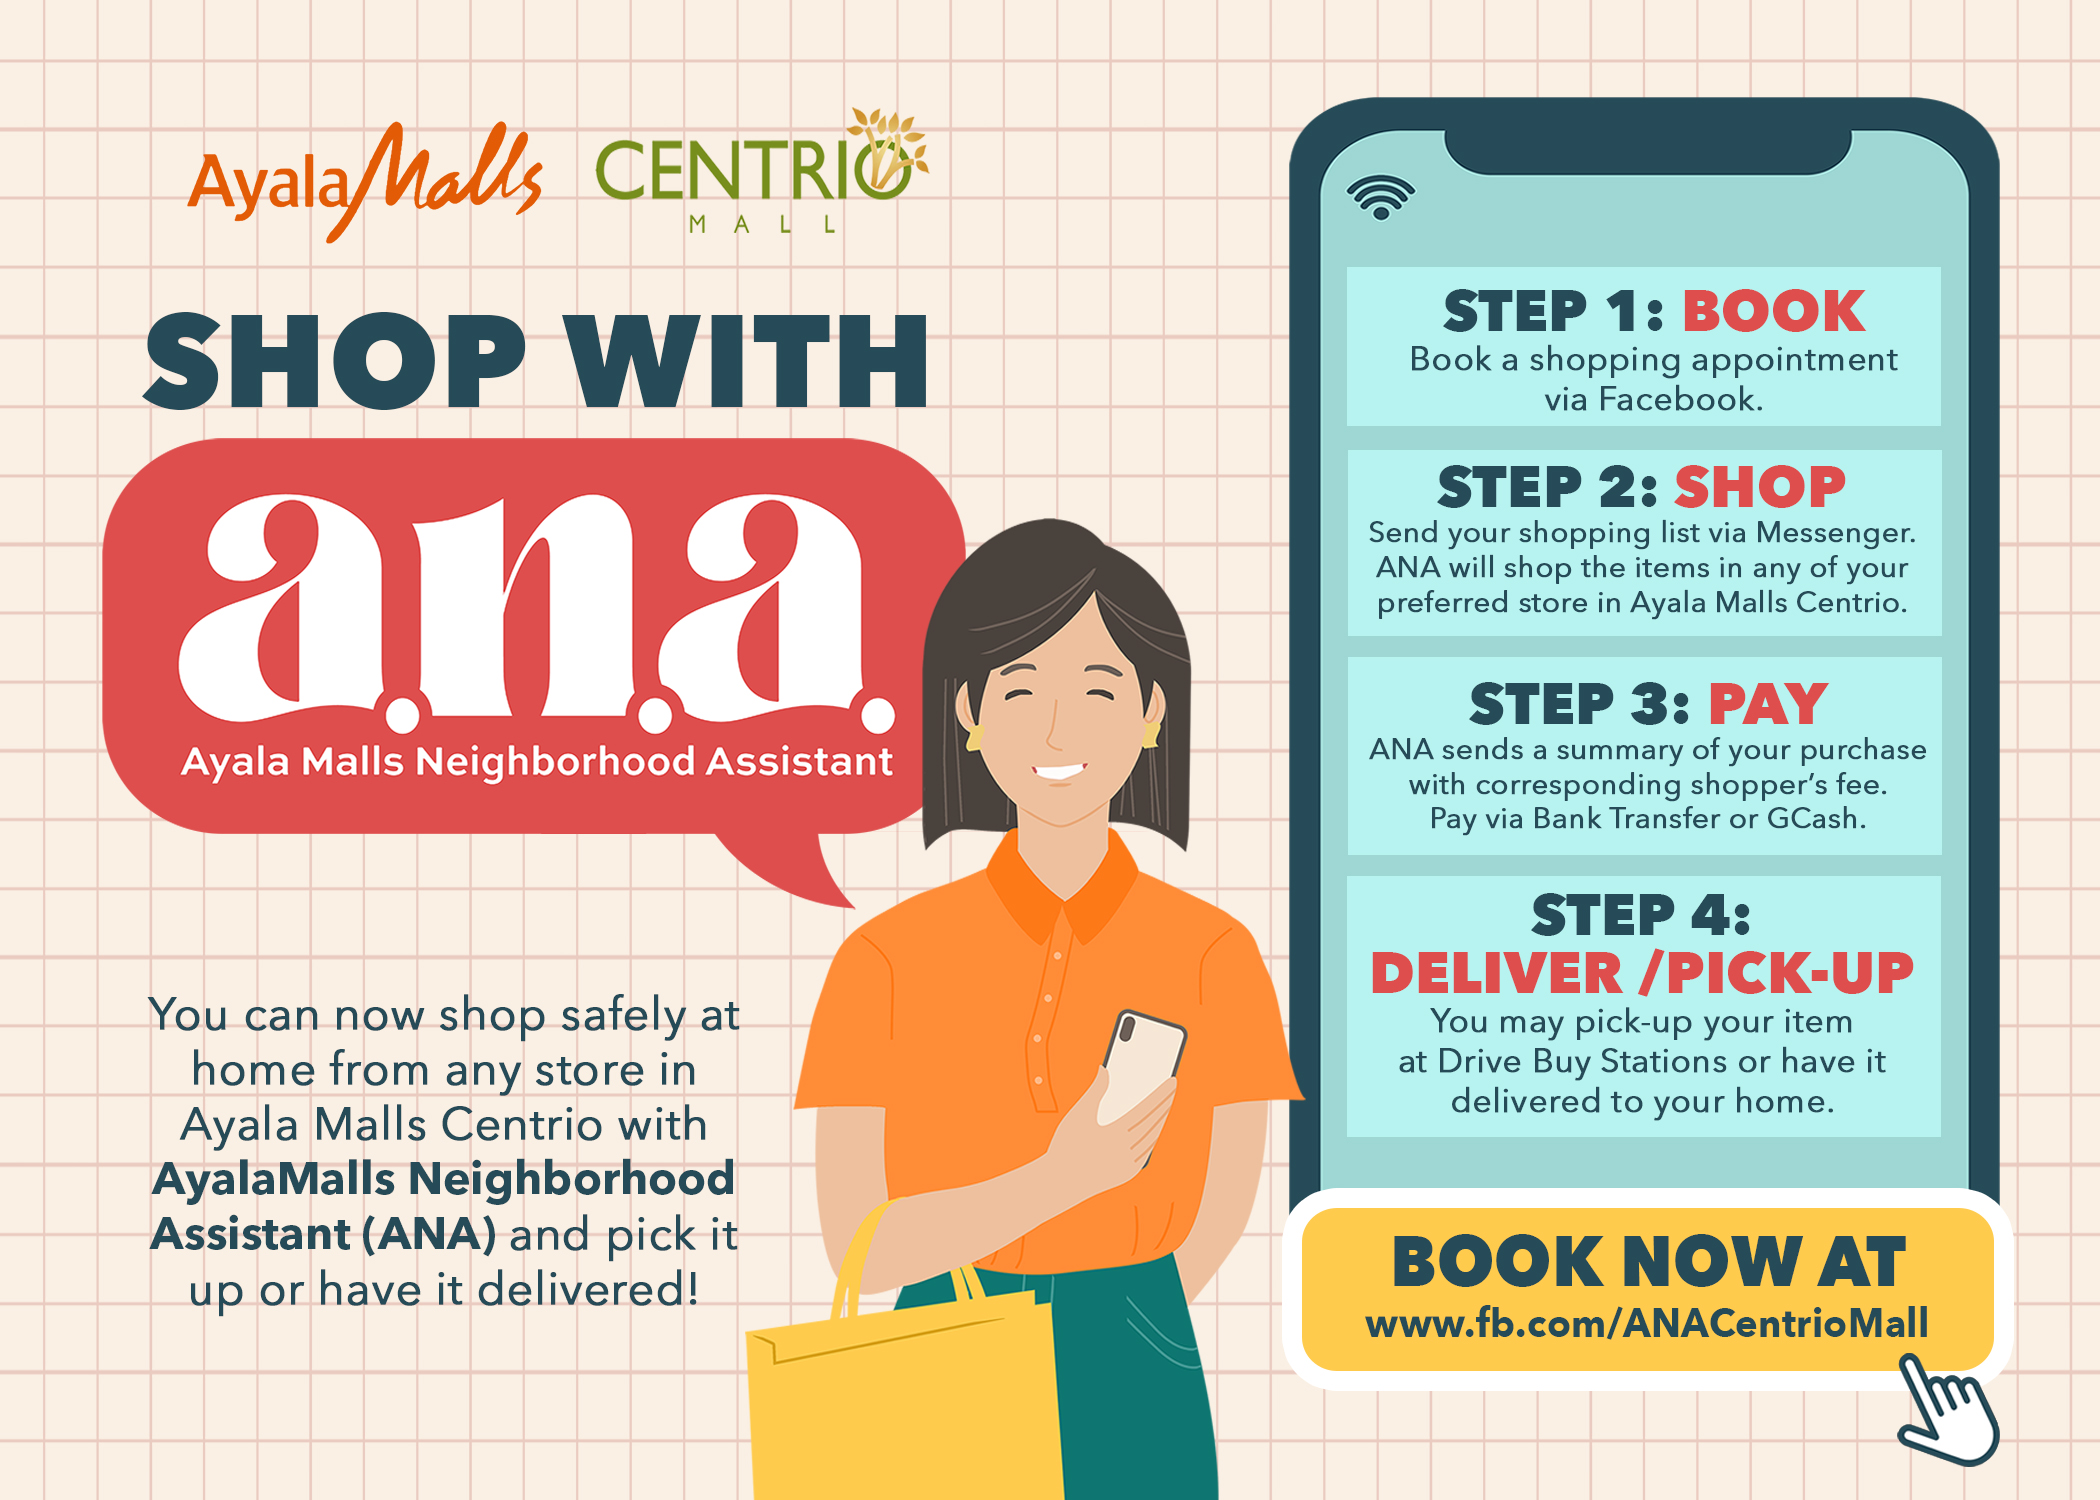 Ayala Malls Centrio’s ‘ANA’ makes virtual shopping, pick up and delivery a breeze